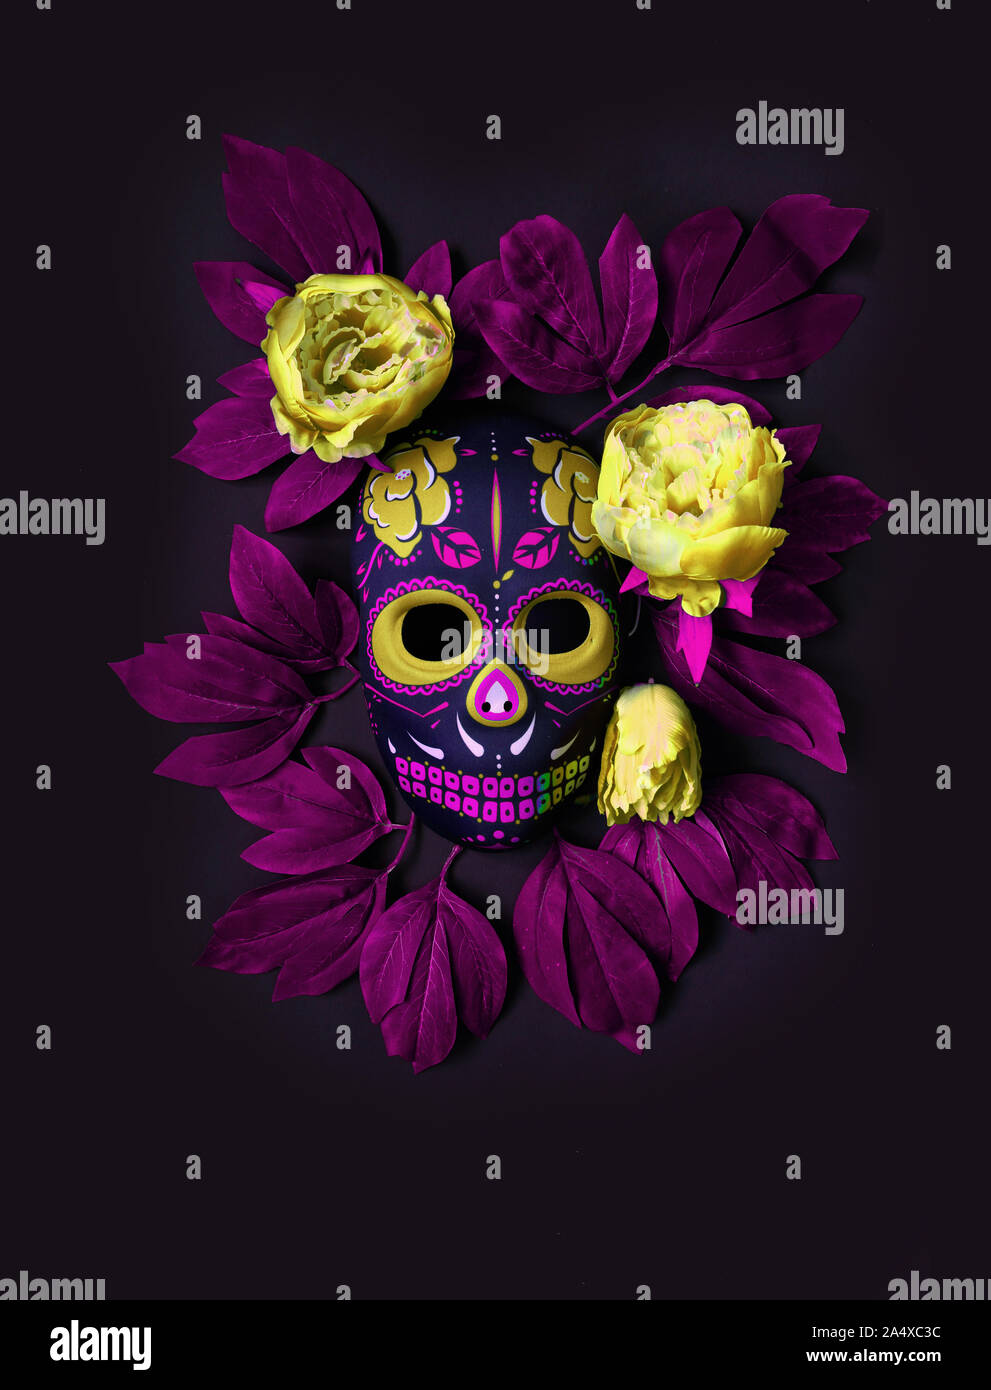 Sugar skull mask with flowers used for celebrating Day of the Dead in hispanic culture. Mexican symbol of the traditional Dia de los Muertos. Hallowee Stock Photo